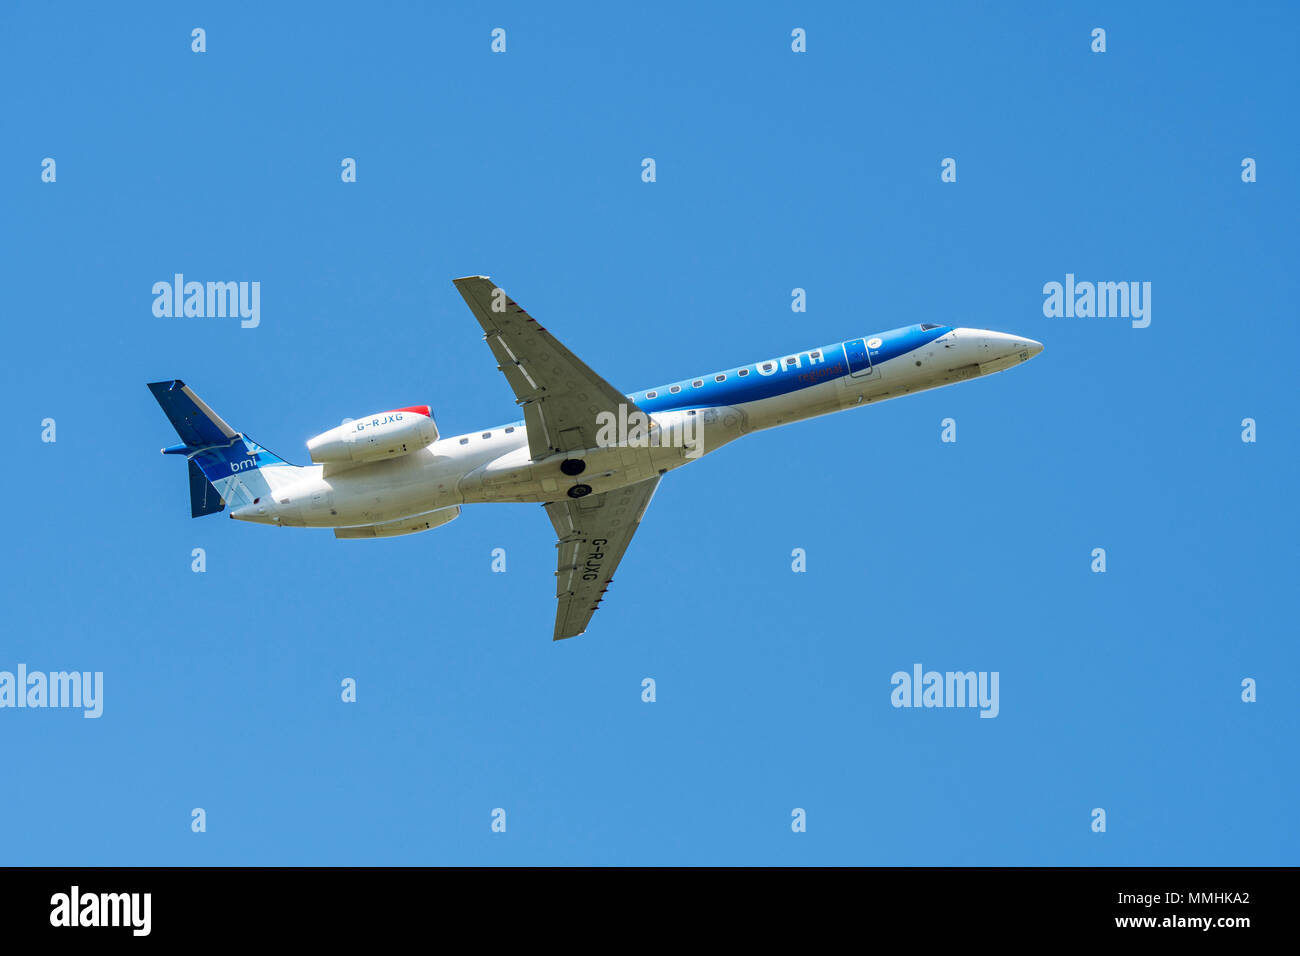 Embraer ERJ-145-EP, twin-engine regional jet from British Midland Regional Limited / Flybmi, British regional airline in flight against blue sky Stock Photo